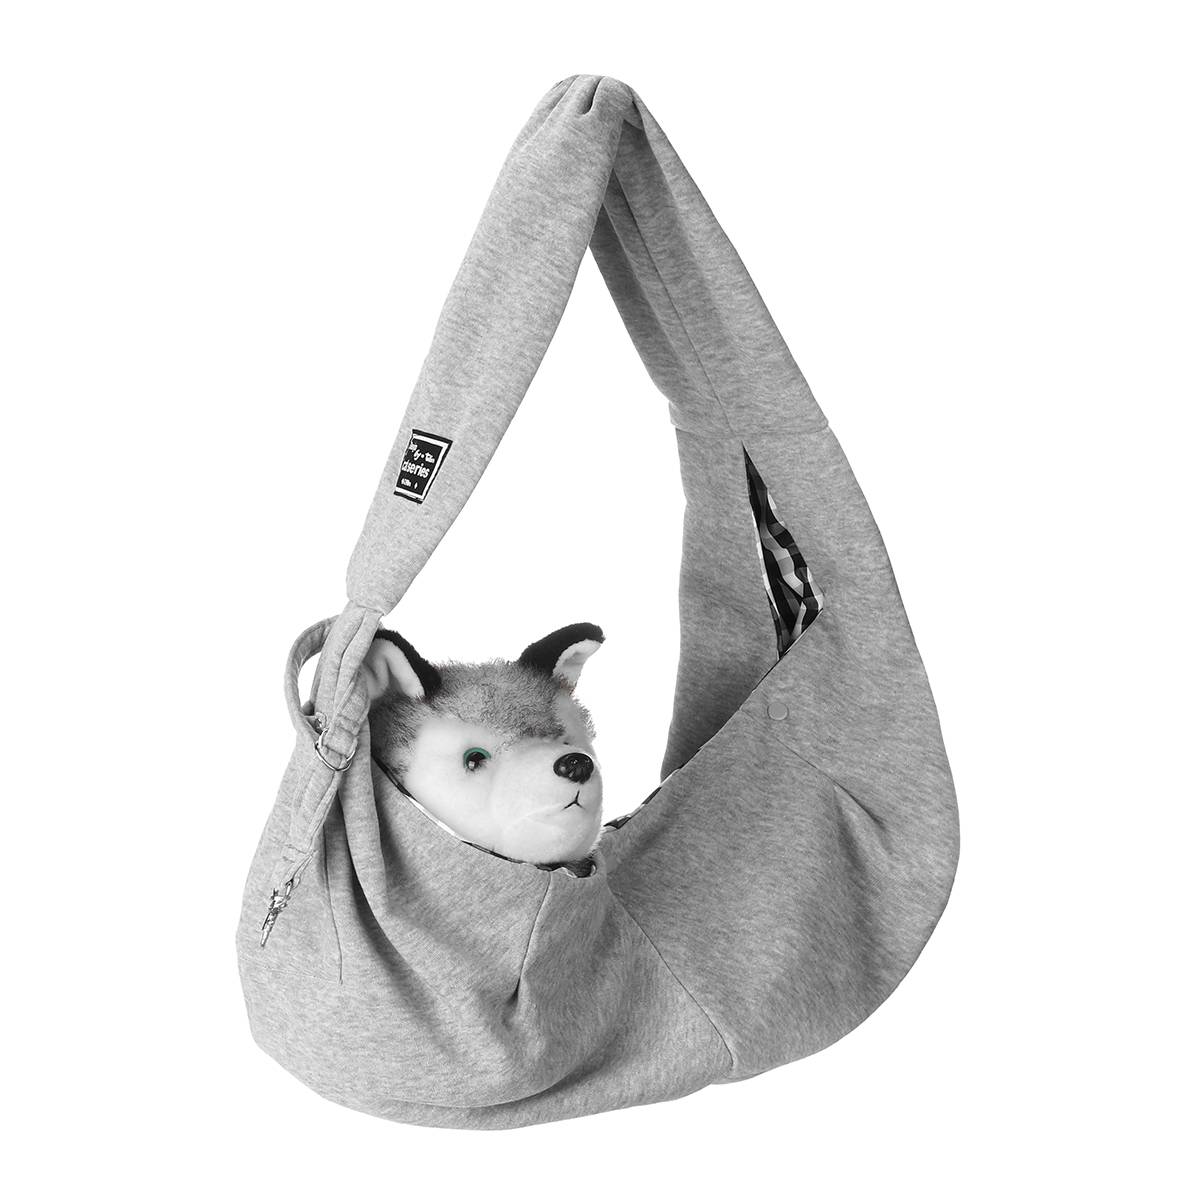 Dog Carrier Bag - Simple And Comfortable